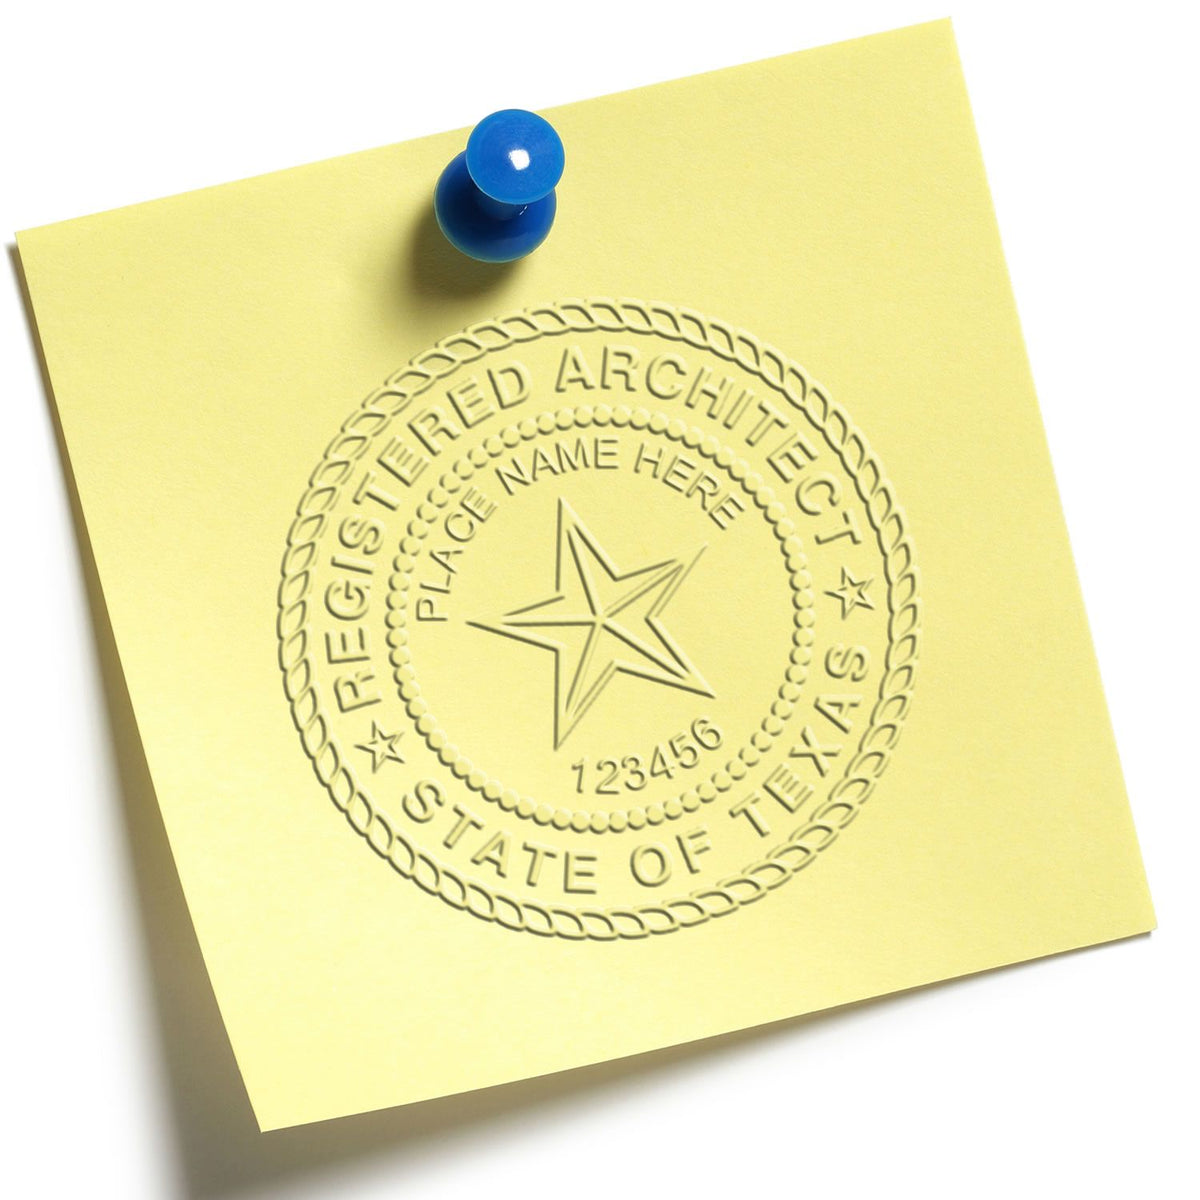 An alternative view of the Heavy Duty Cast Iron Texas Architect Embosser stamped on a sheet of paper showing the image in use